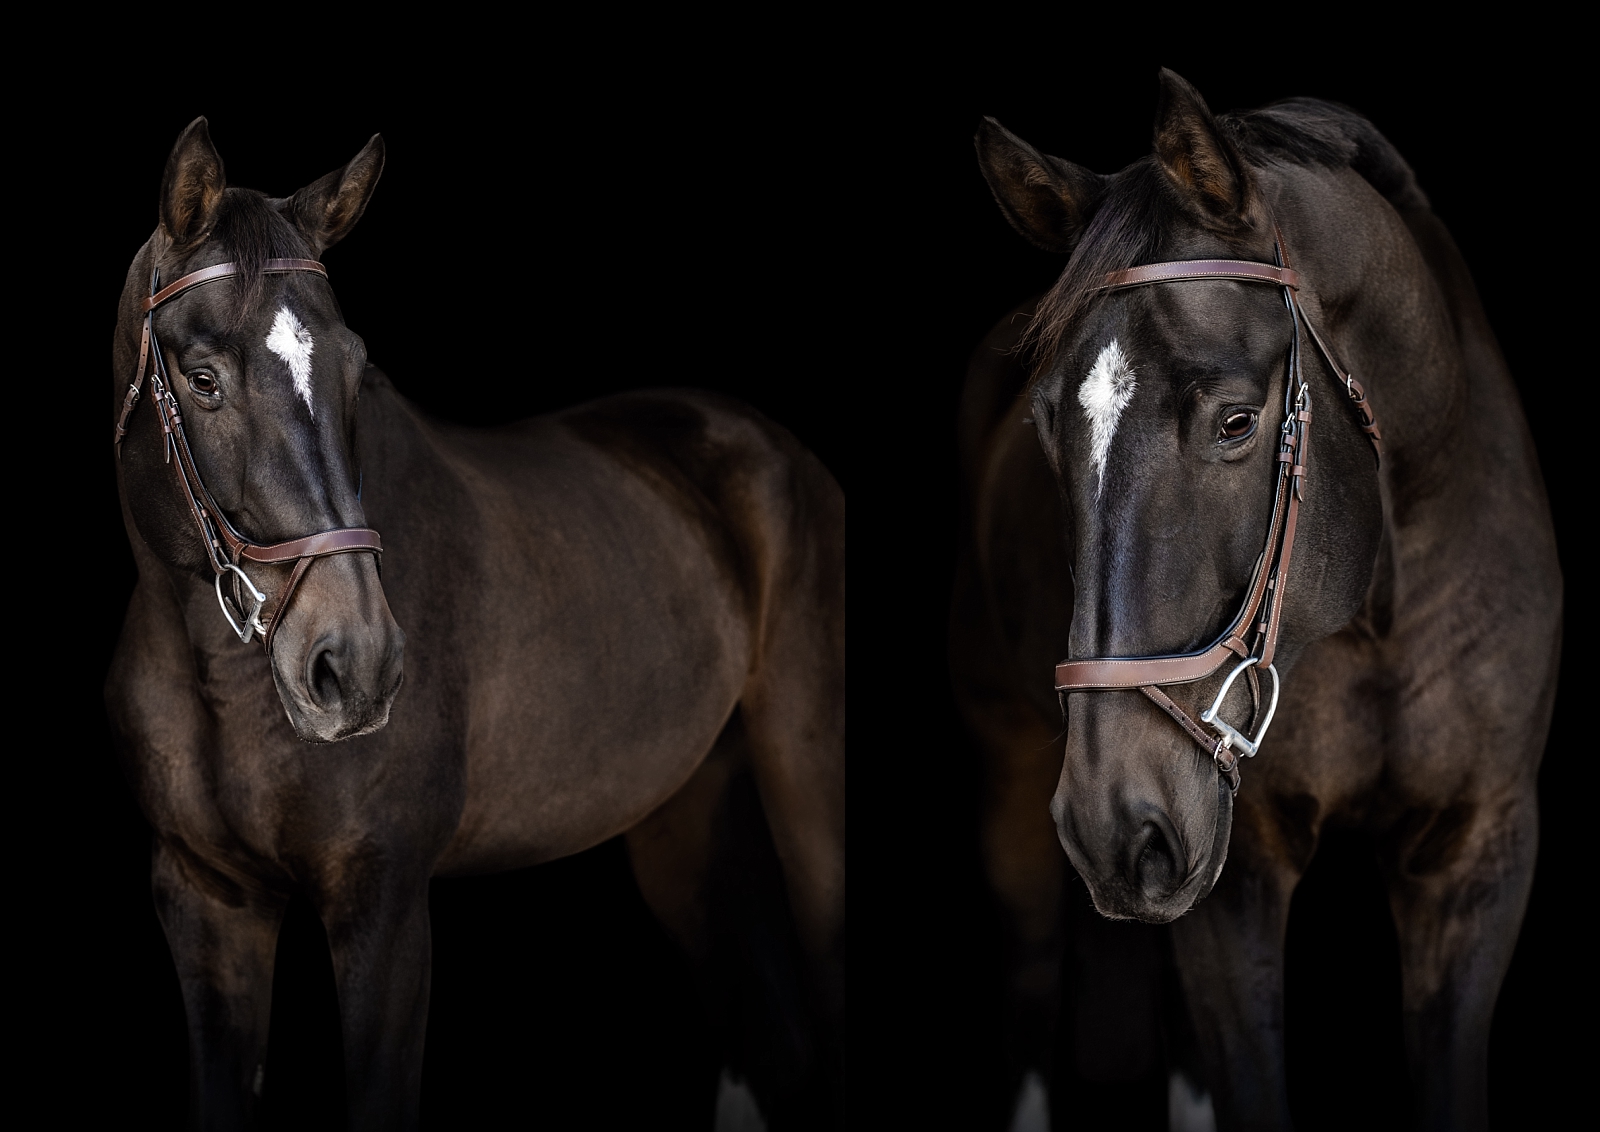 Gorgeous jumper gelding photographed on a black background in fine art form near Gainesville, FL at Archer Farms.